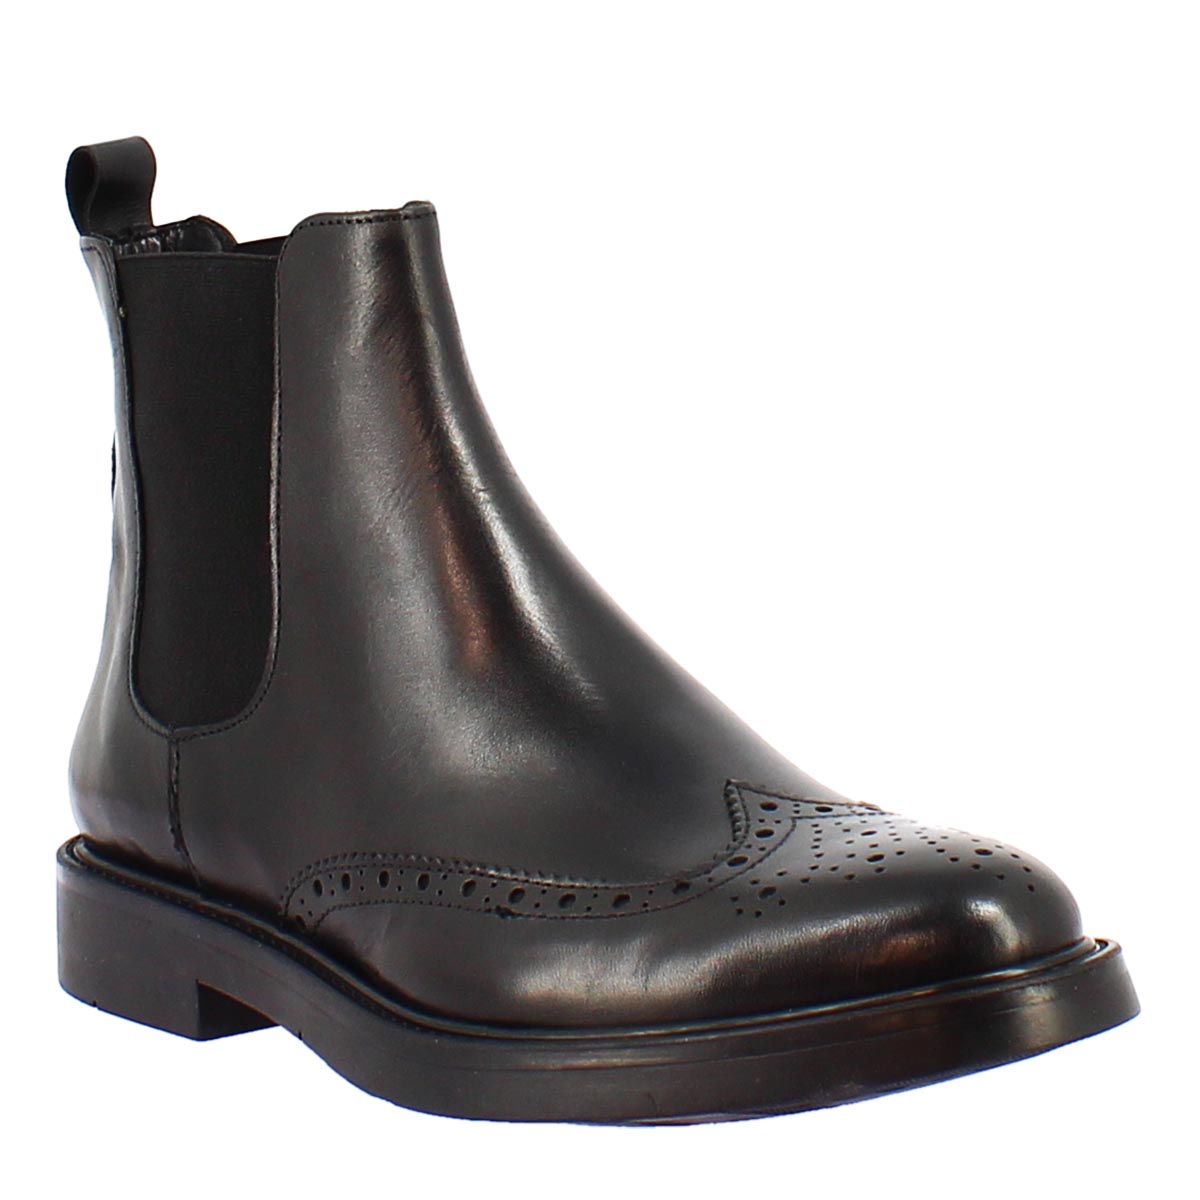 Chelsea boot in black leather with rubber sole